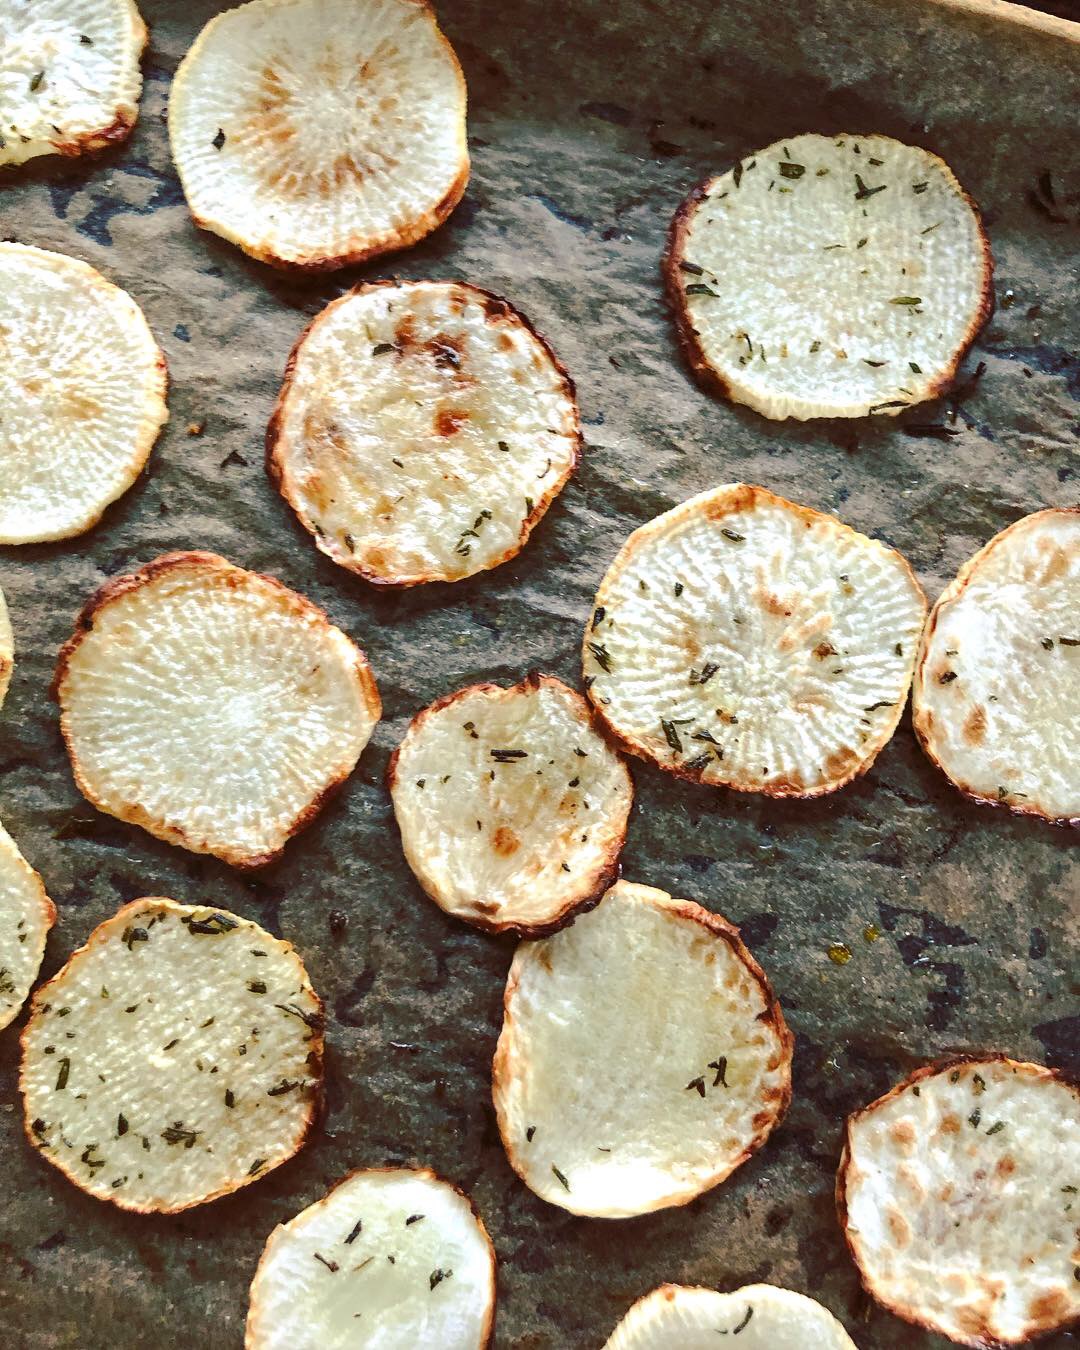 Roasted Turnip Slices from Spinach Tiger